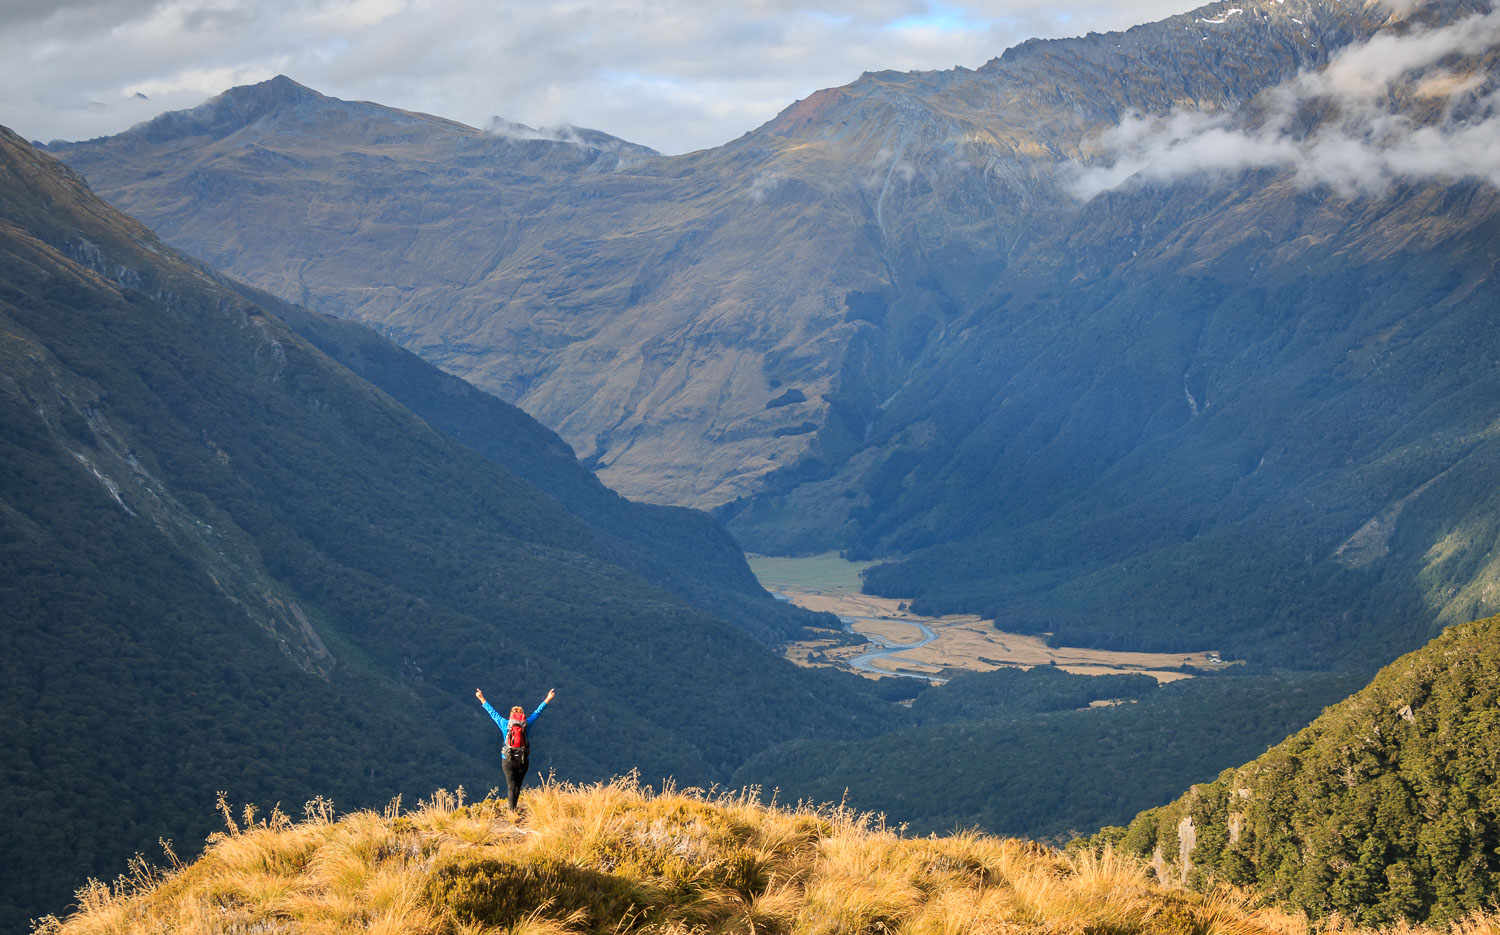 Taking in the view at Aspiring National Park New Zealand